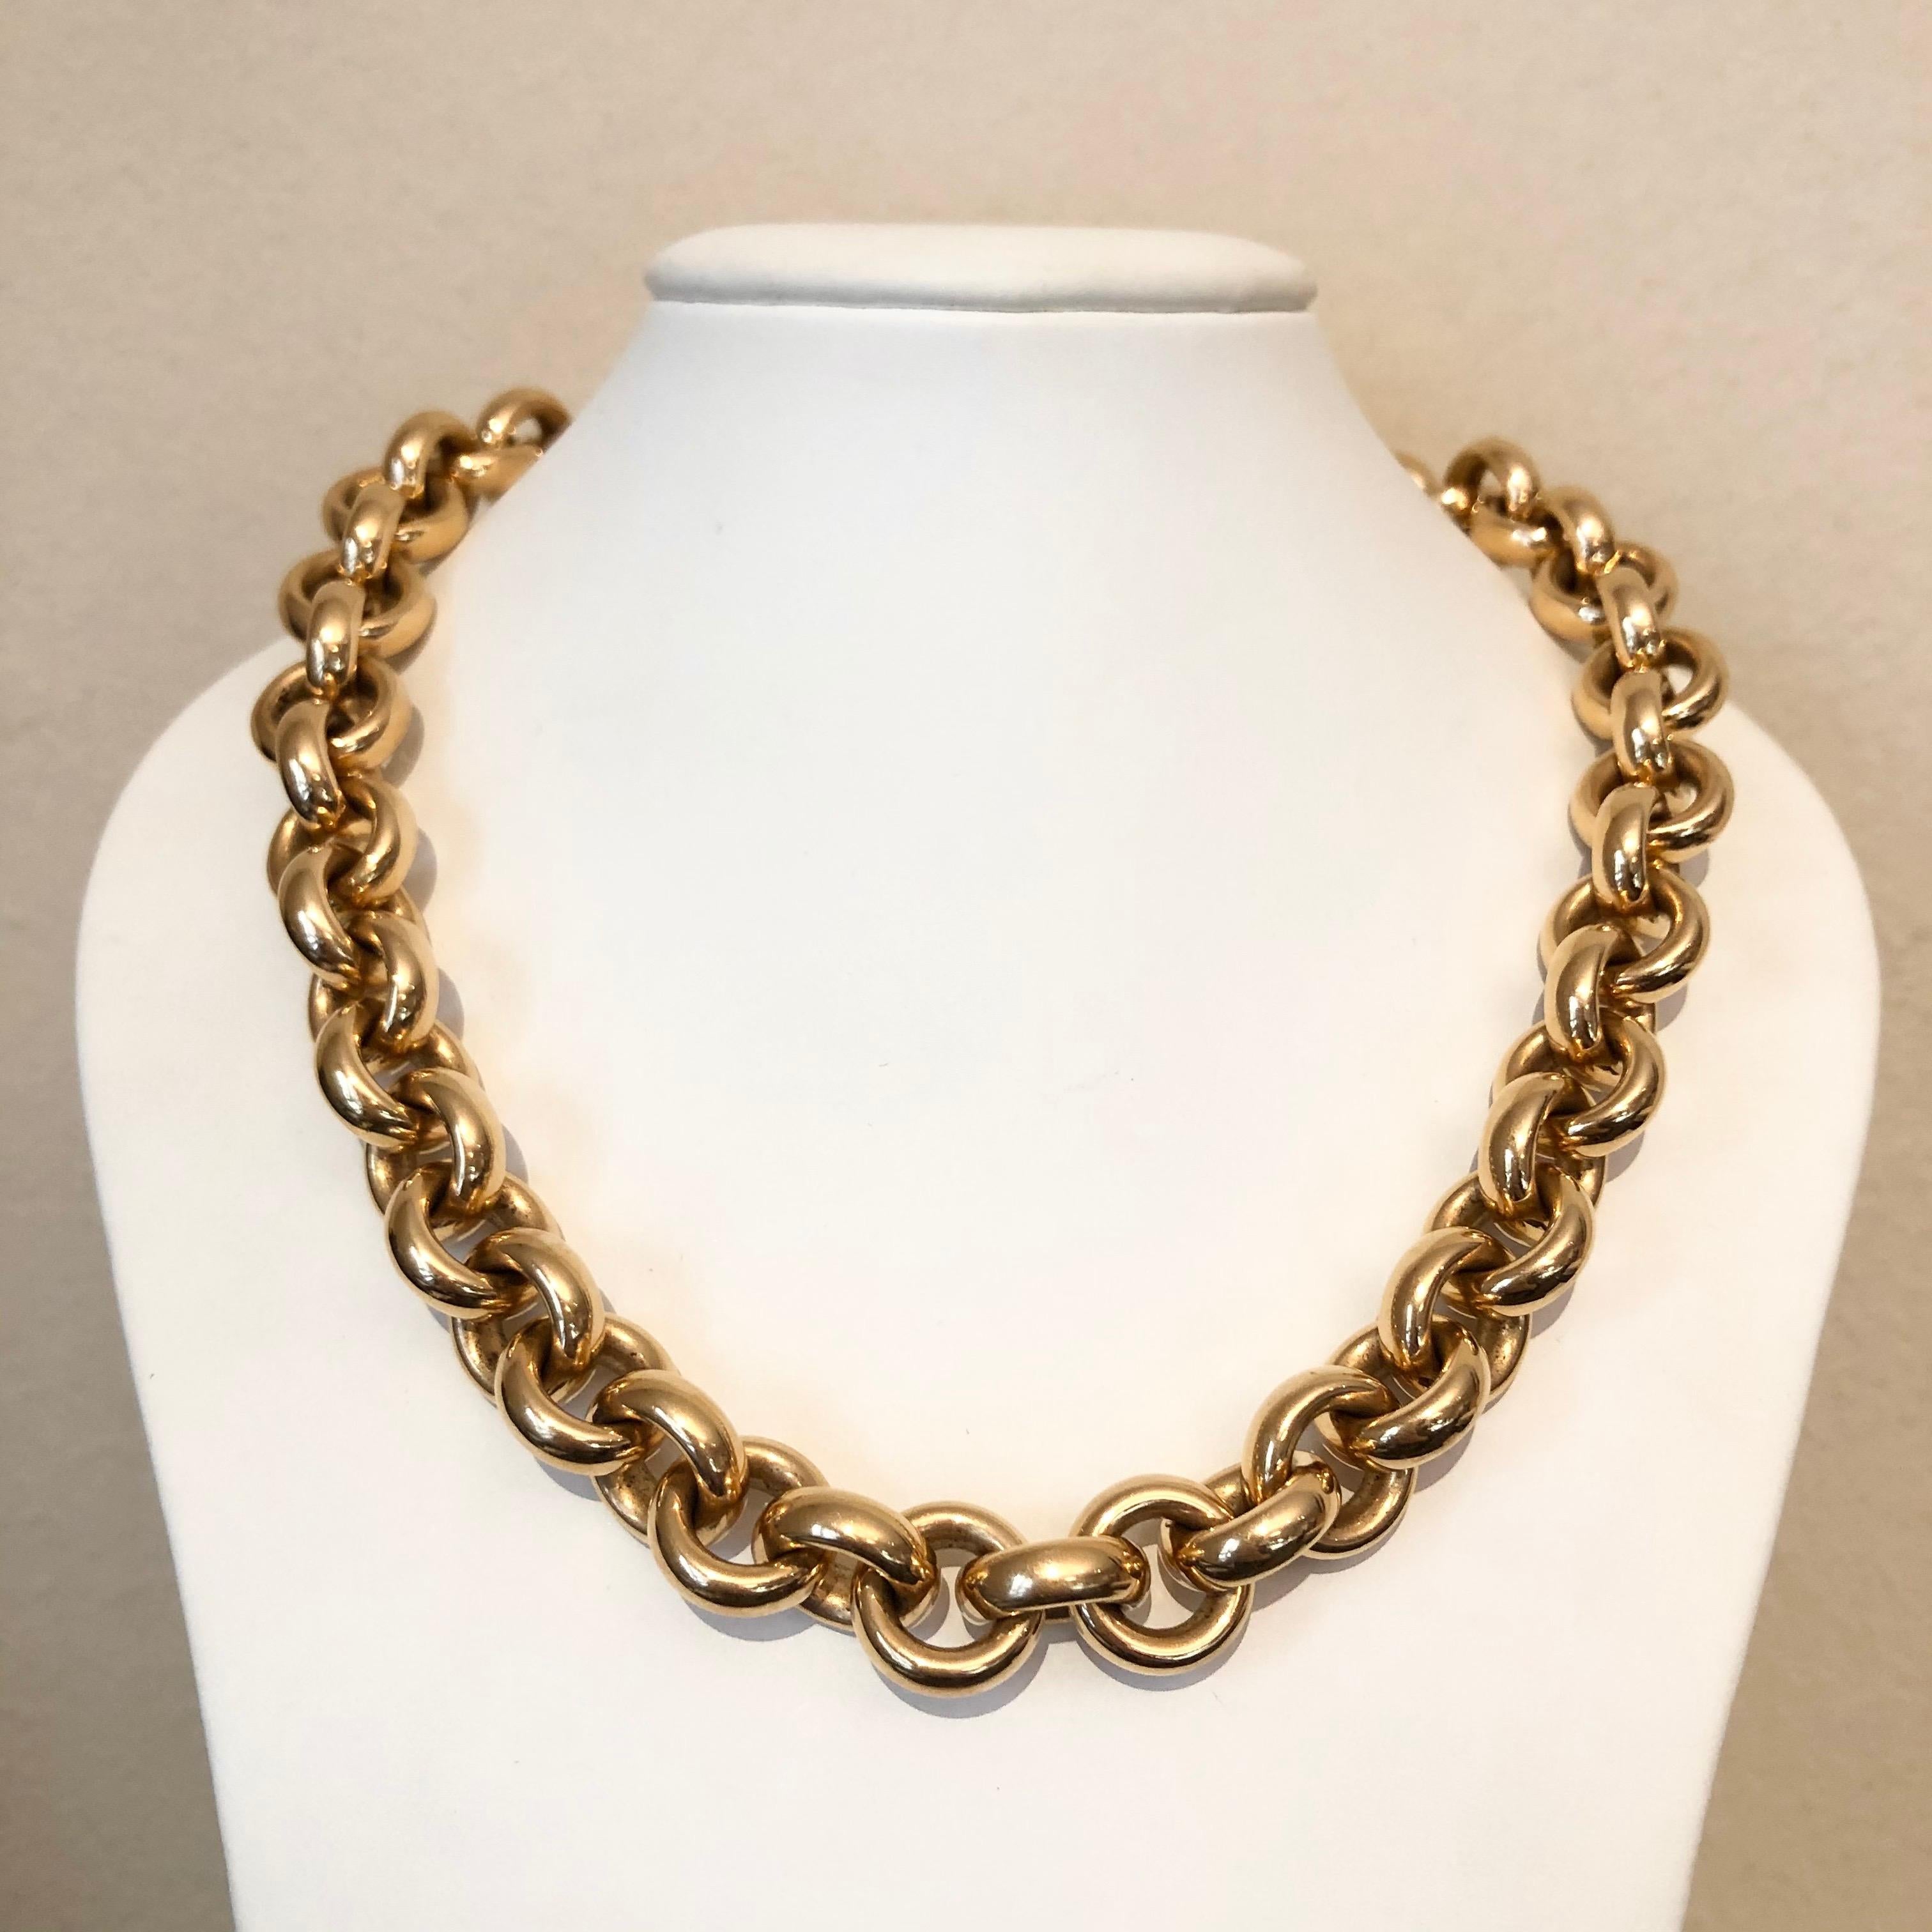 Contemporary 18 Karat Yellow Gold Diamond Necklace by Isabelle Fa